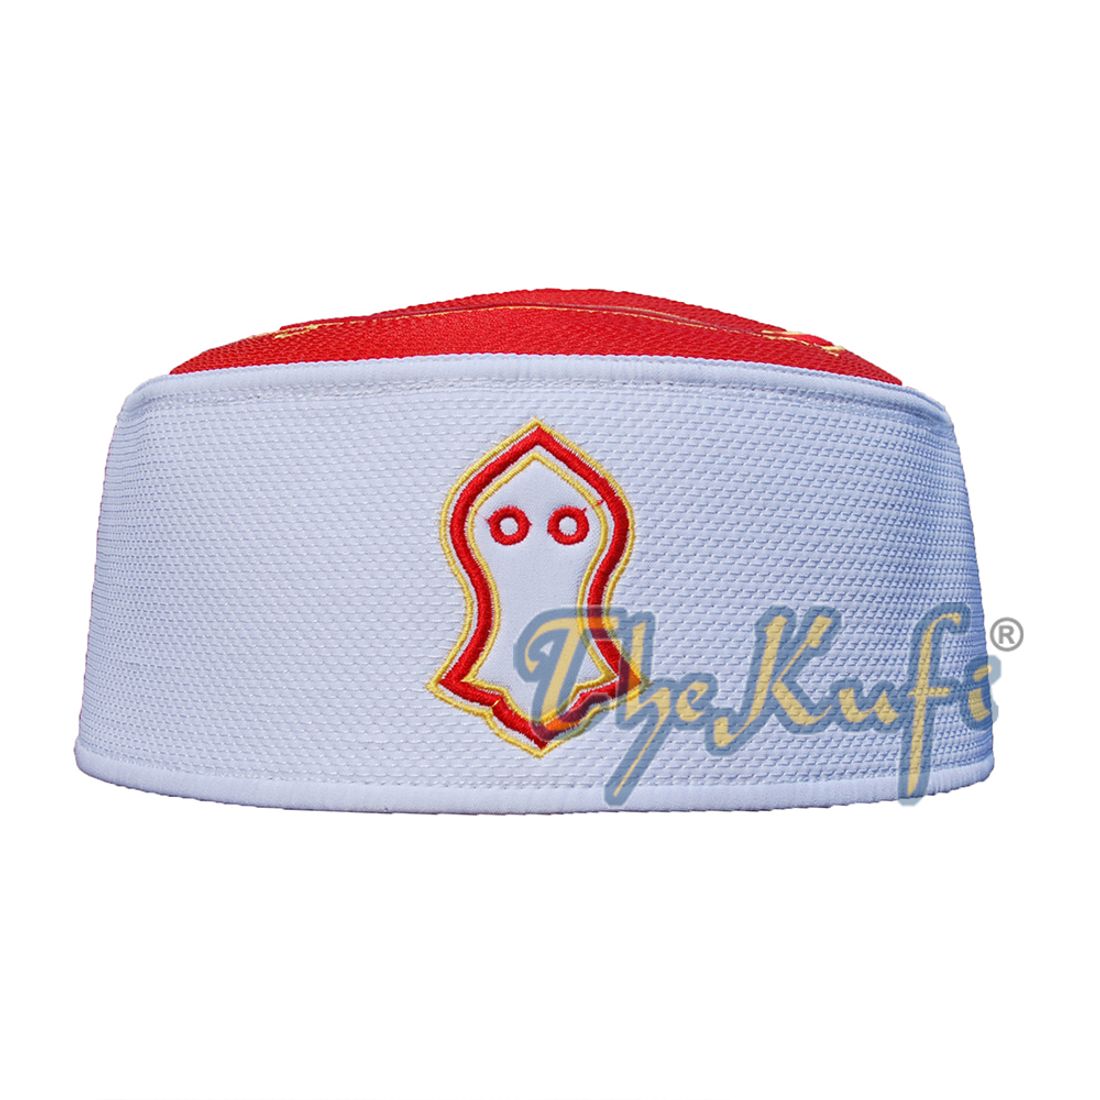 Rigid Red & White Golden Embroidered Sandal Kufi Crown